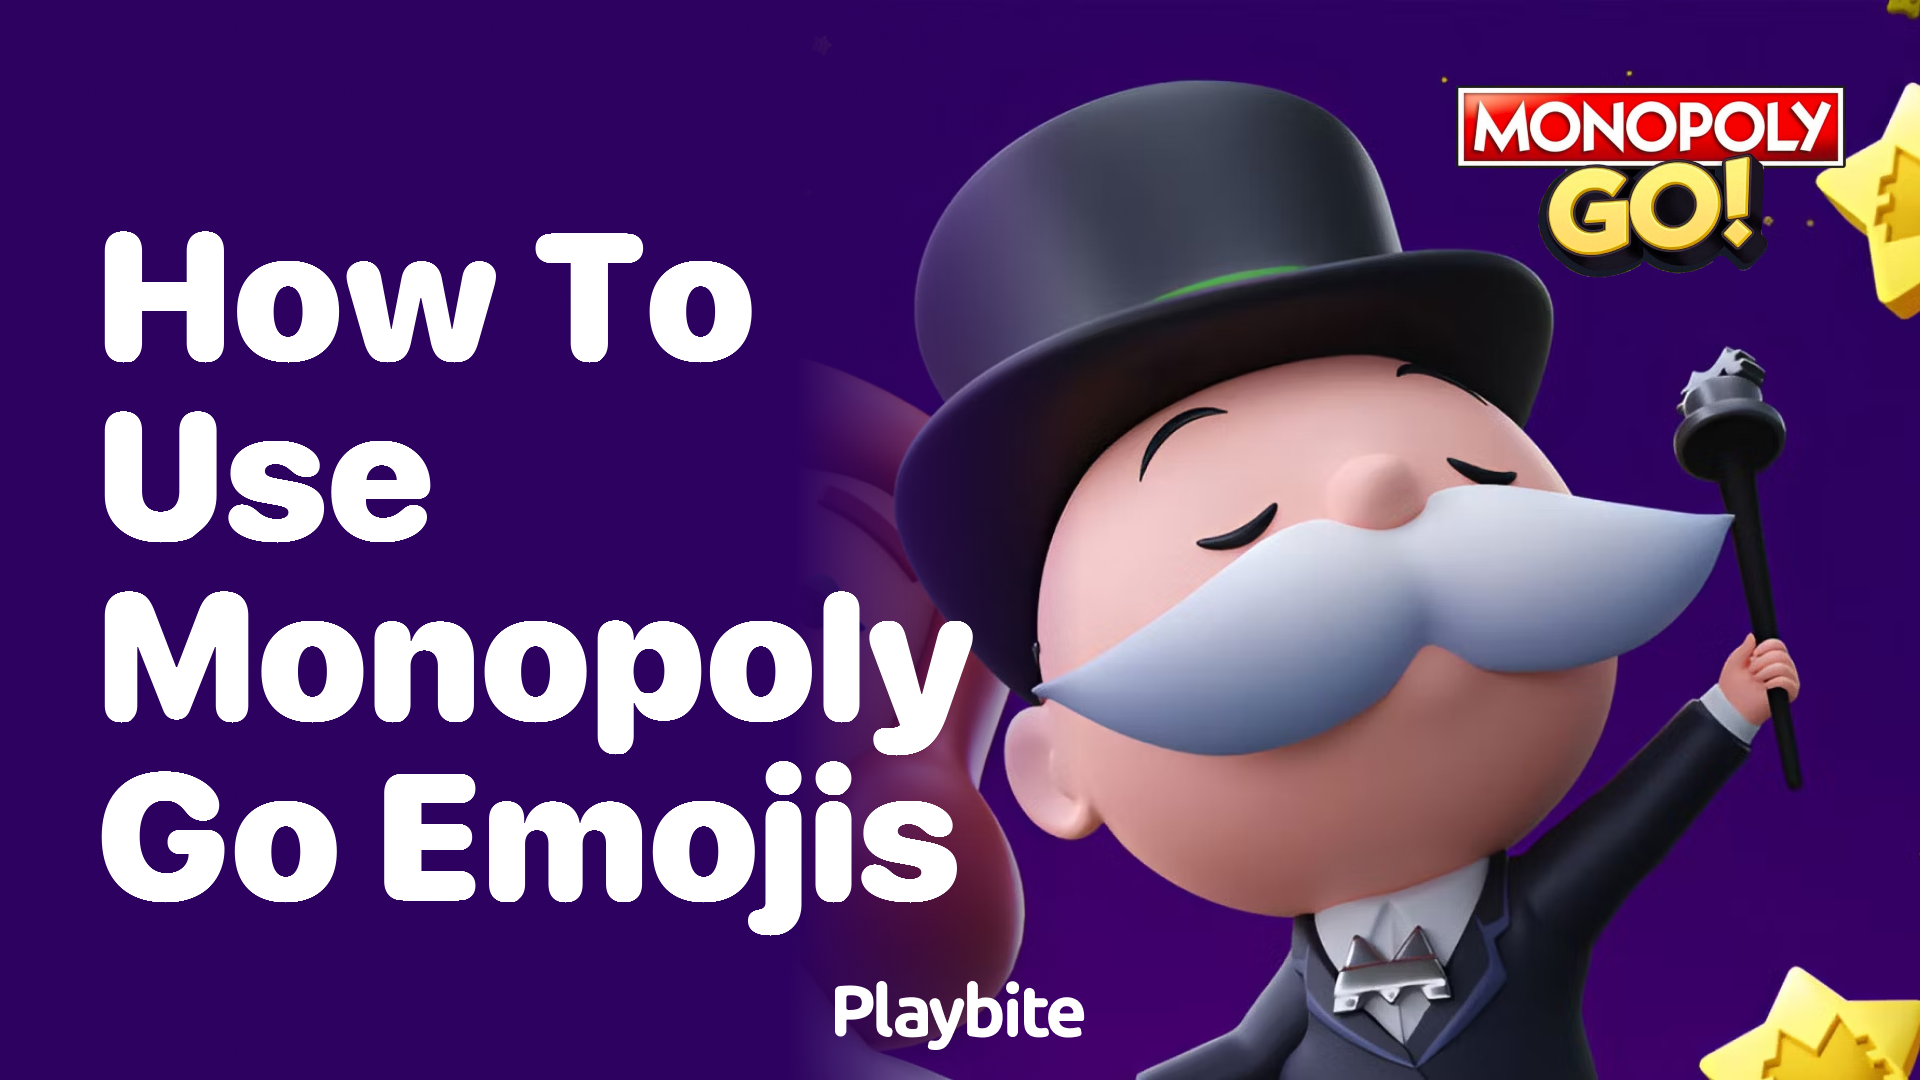 How to Use Monopoly Go Emojis: A Fun Guide